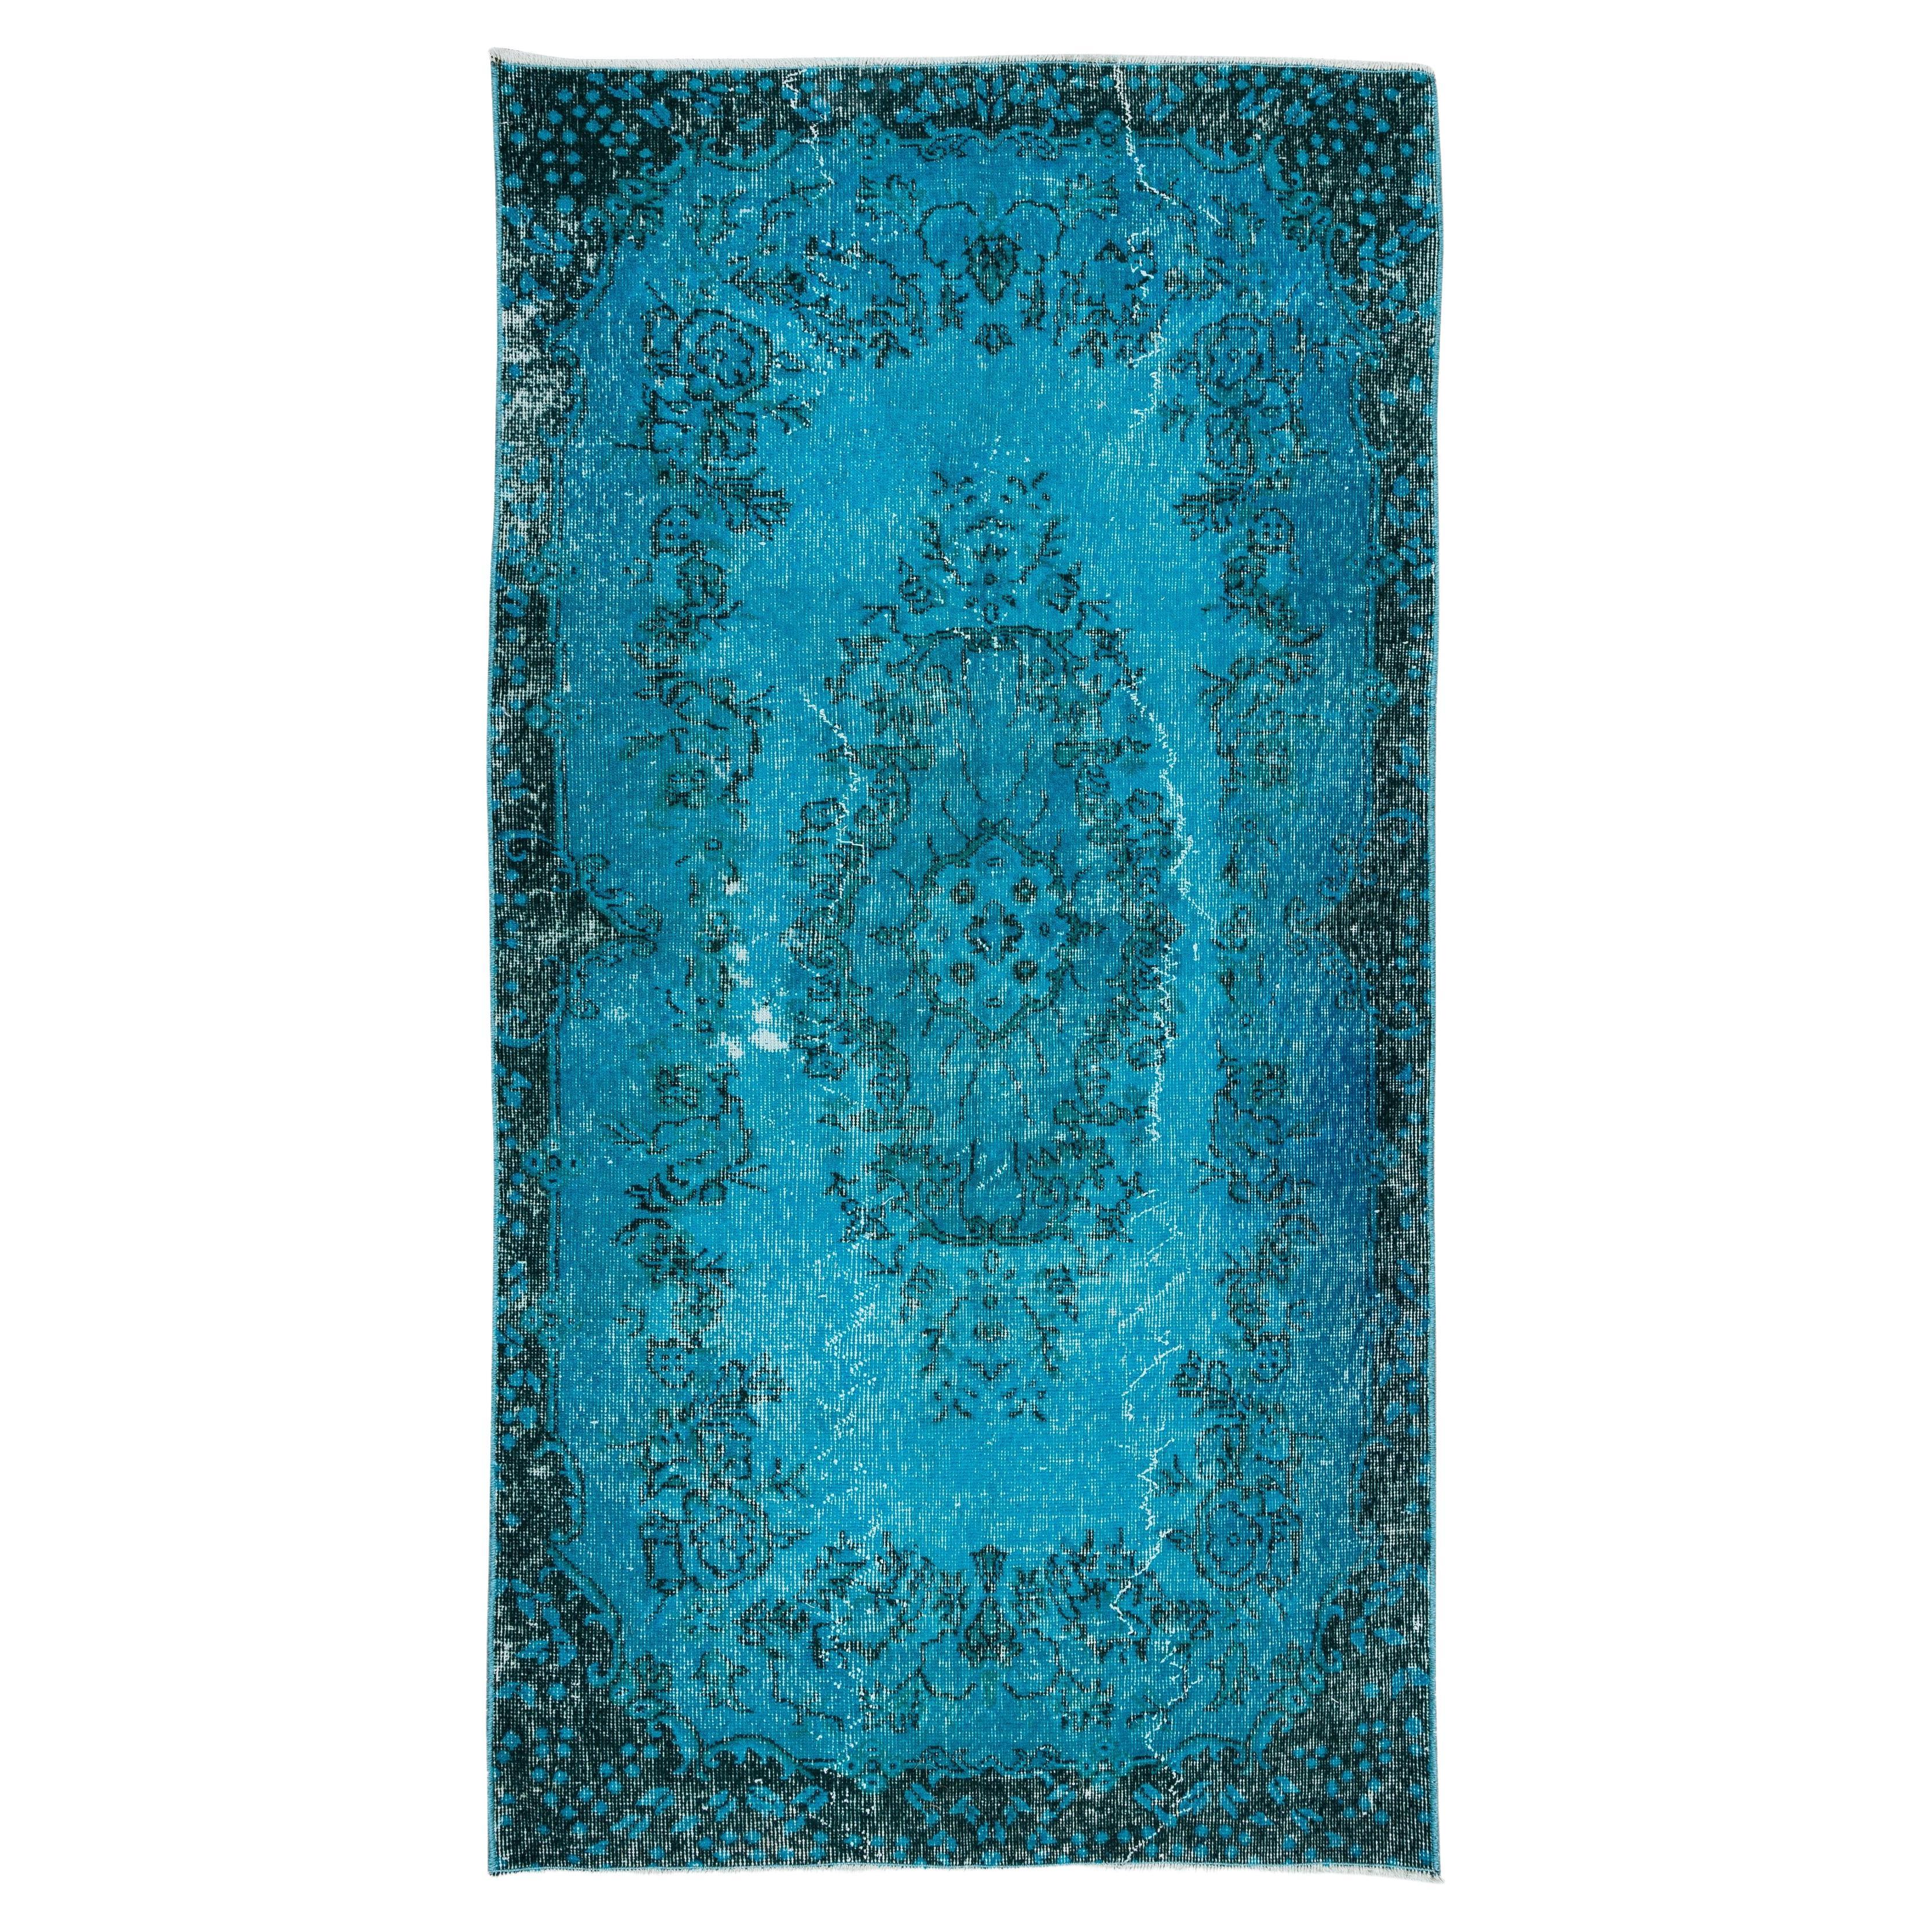 3.7x6.9 Ft Handmade Vintage Turkish Rug Redyed in Teal, Ideal 4 Modern Interiors